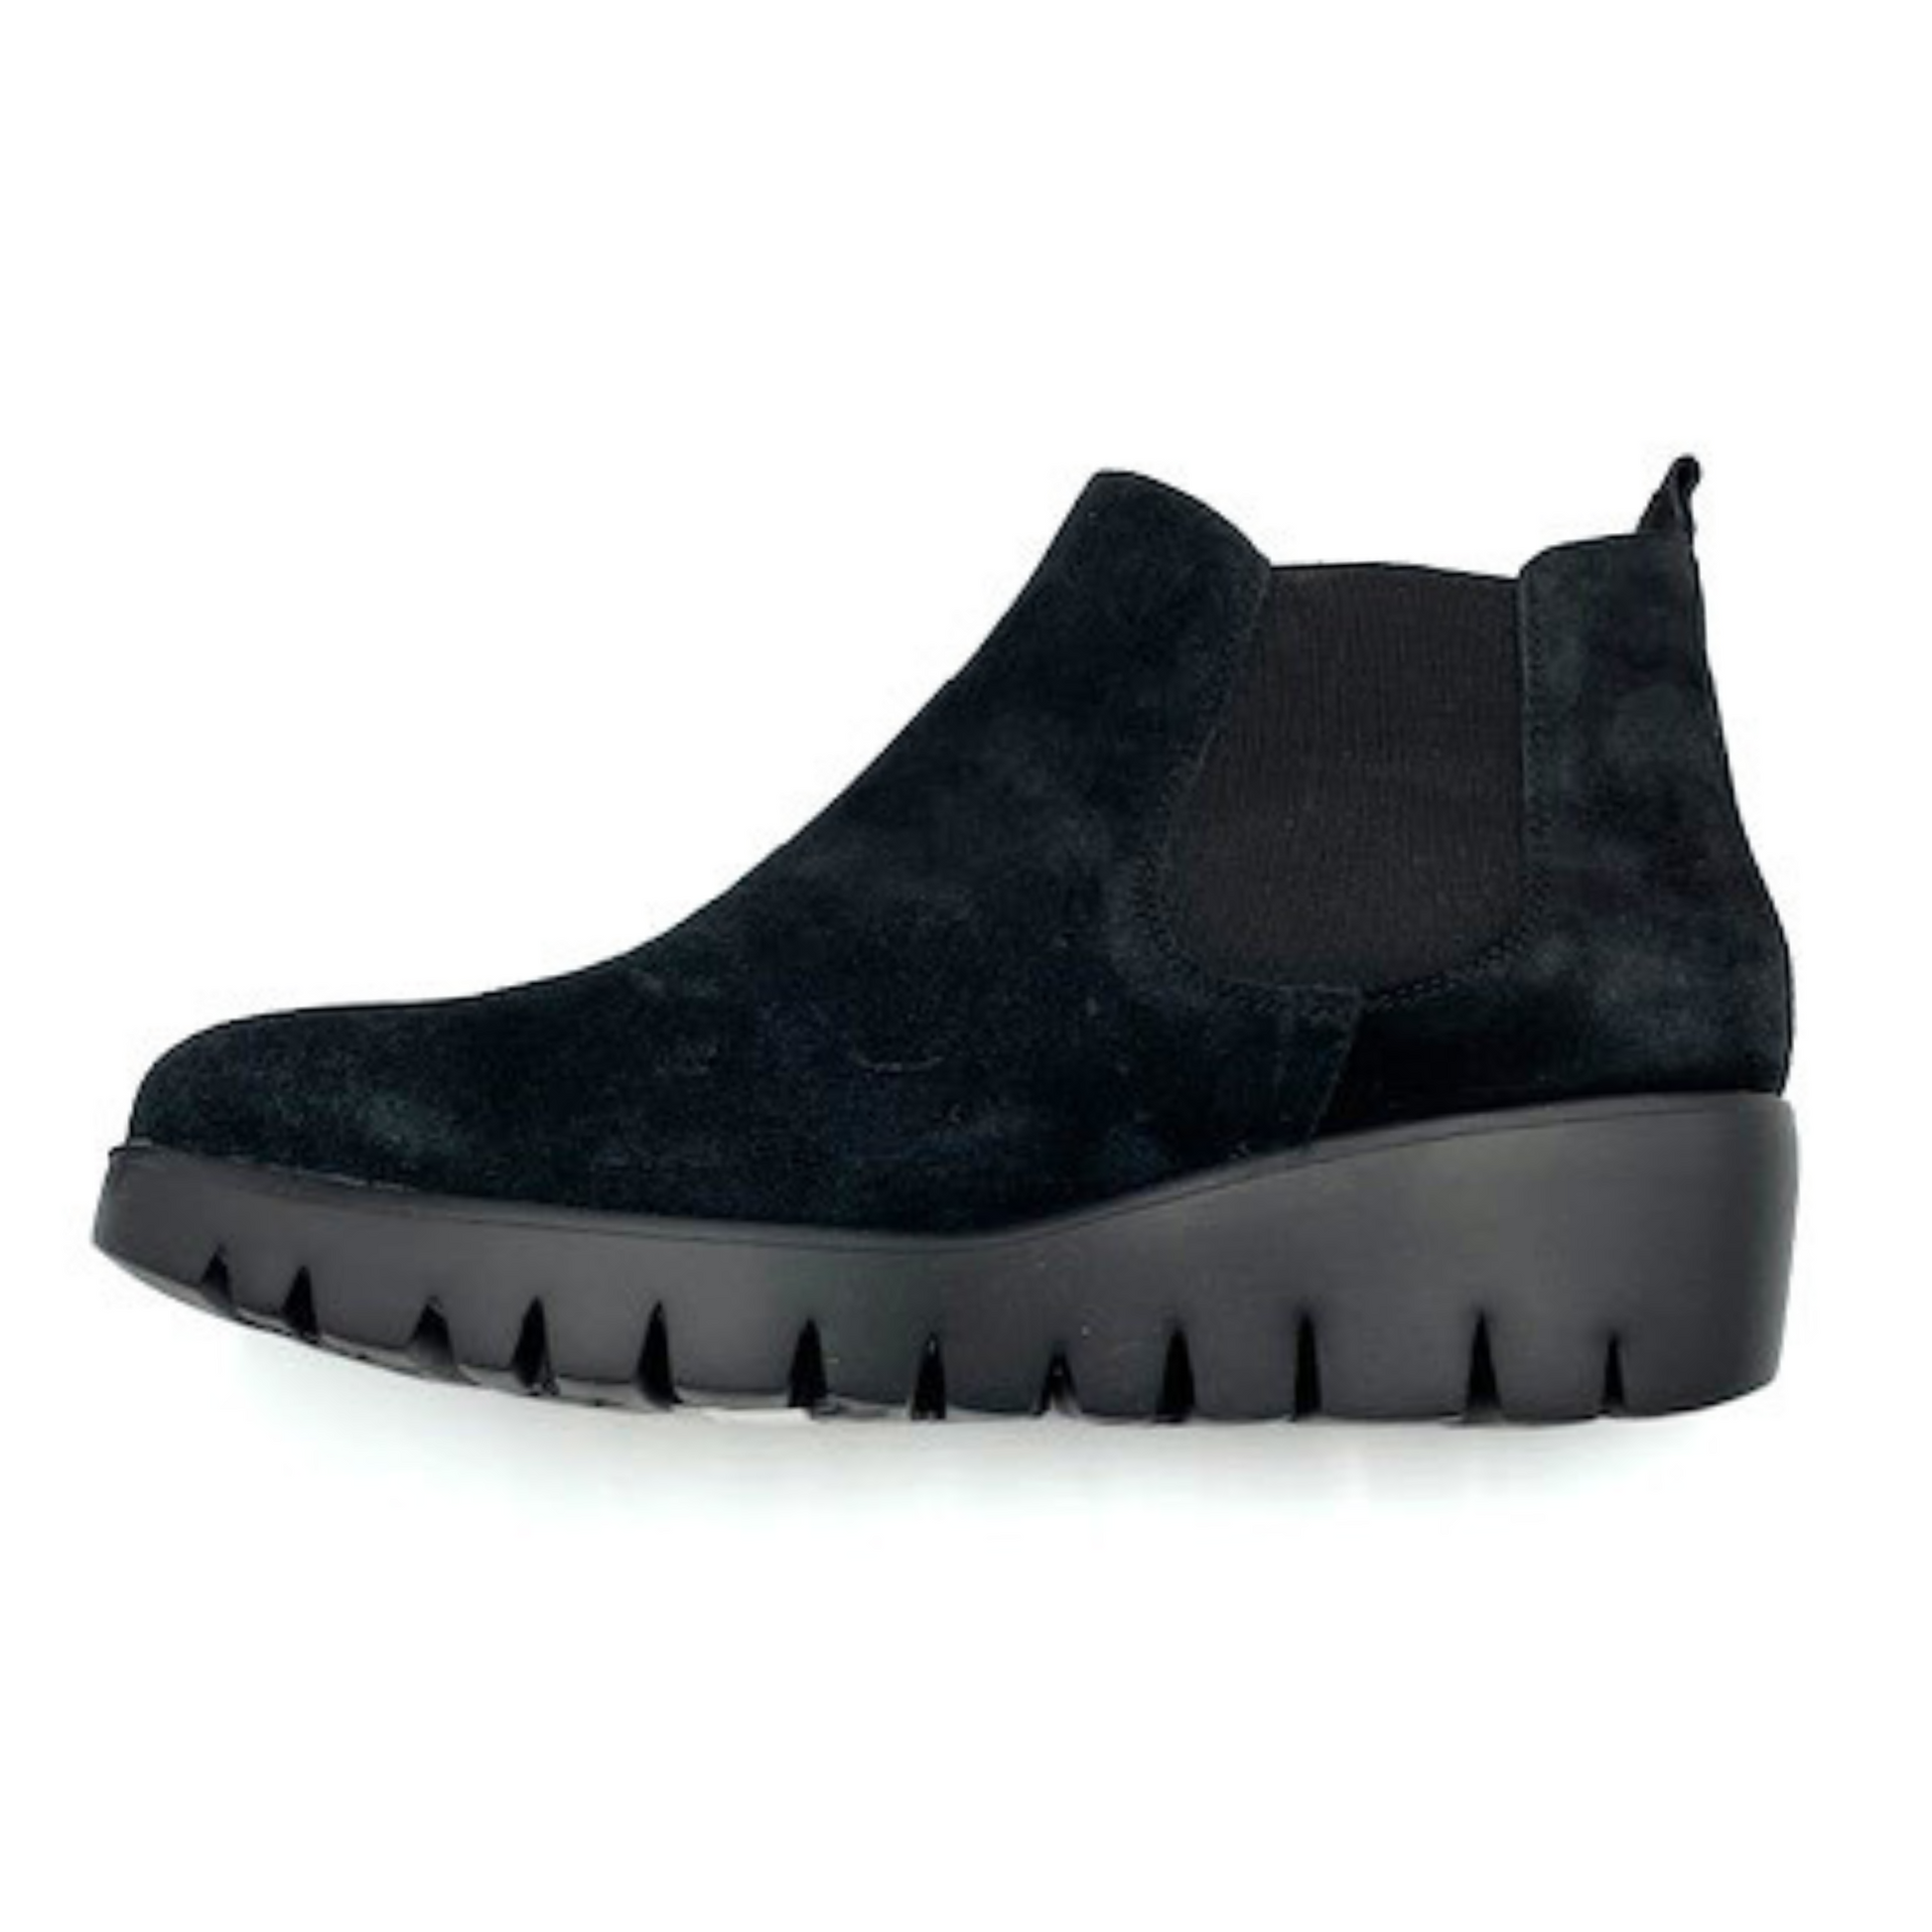 Suede black chelsea boot with thick platform sole and elastic side cut out pictured in profile.